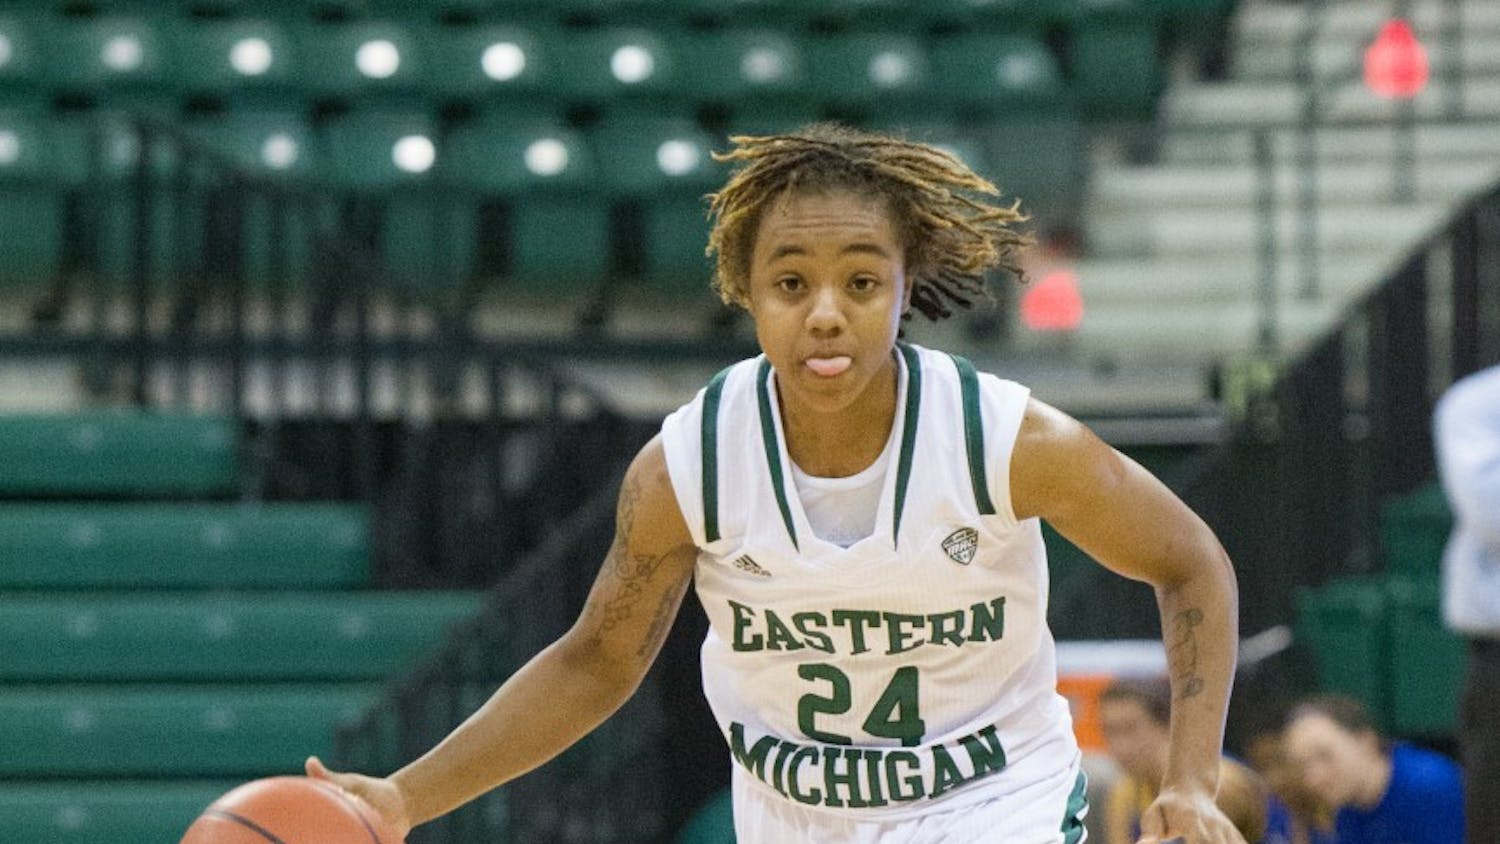 EMU freshman guard Cha’Ron Sweeney scored 25 points in 25 minutes played in Eastern Michigan's 101-52 win over Madonna Friday afternoon.